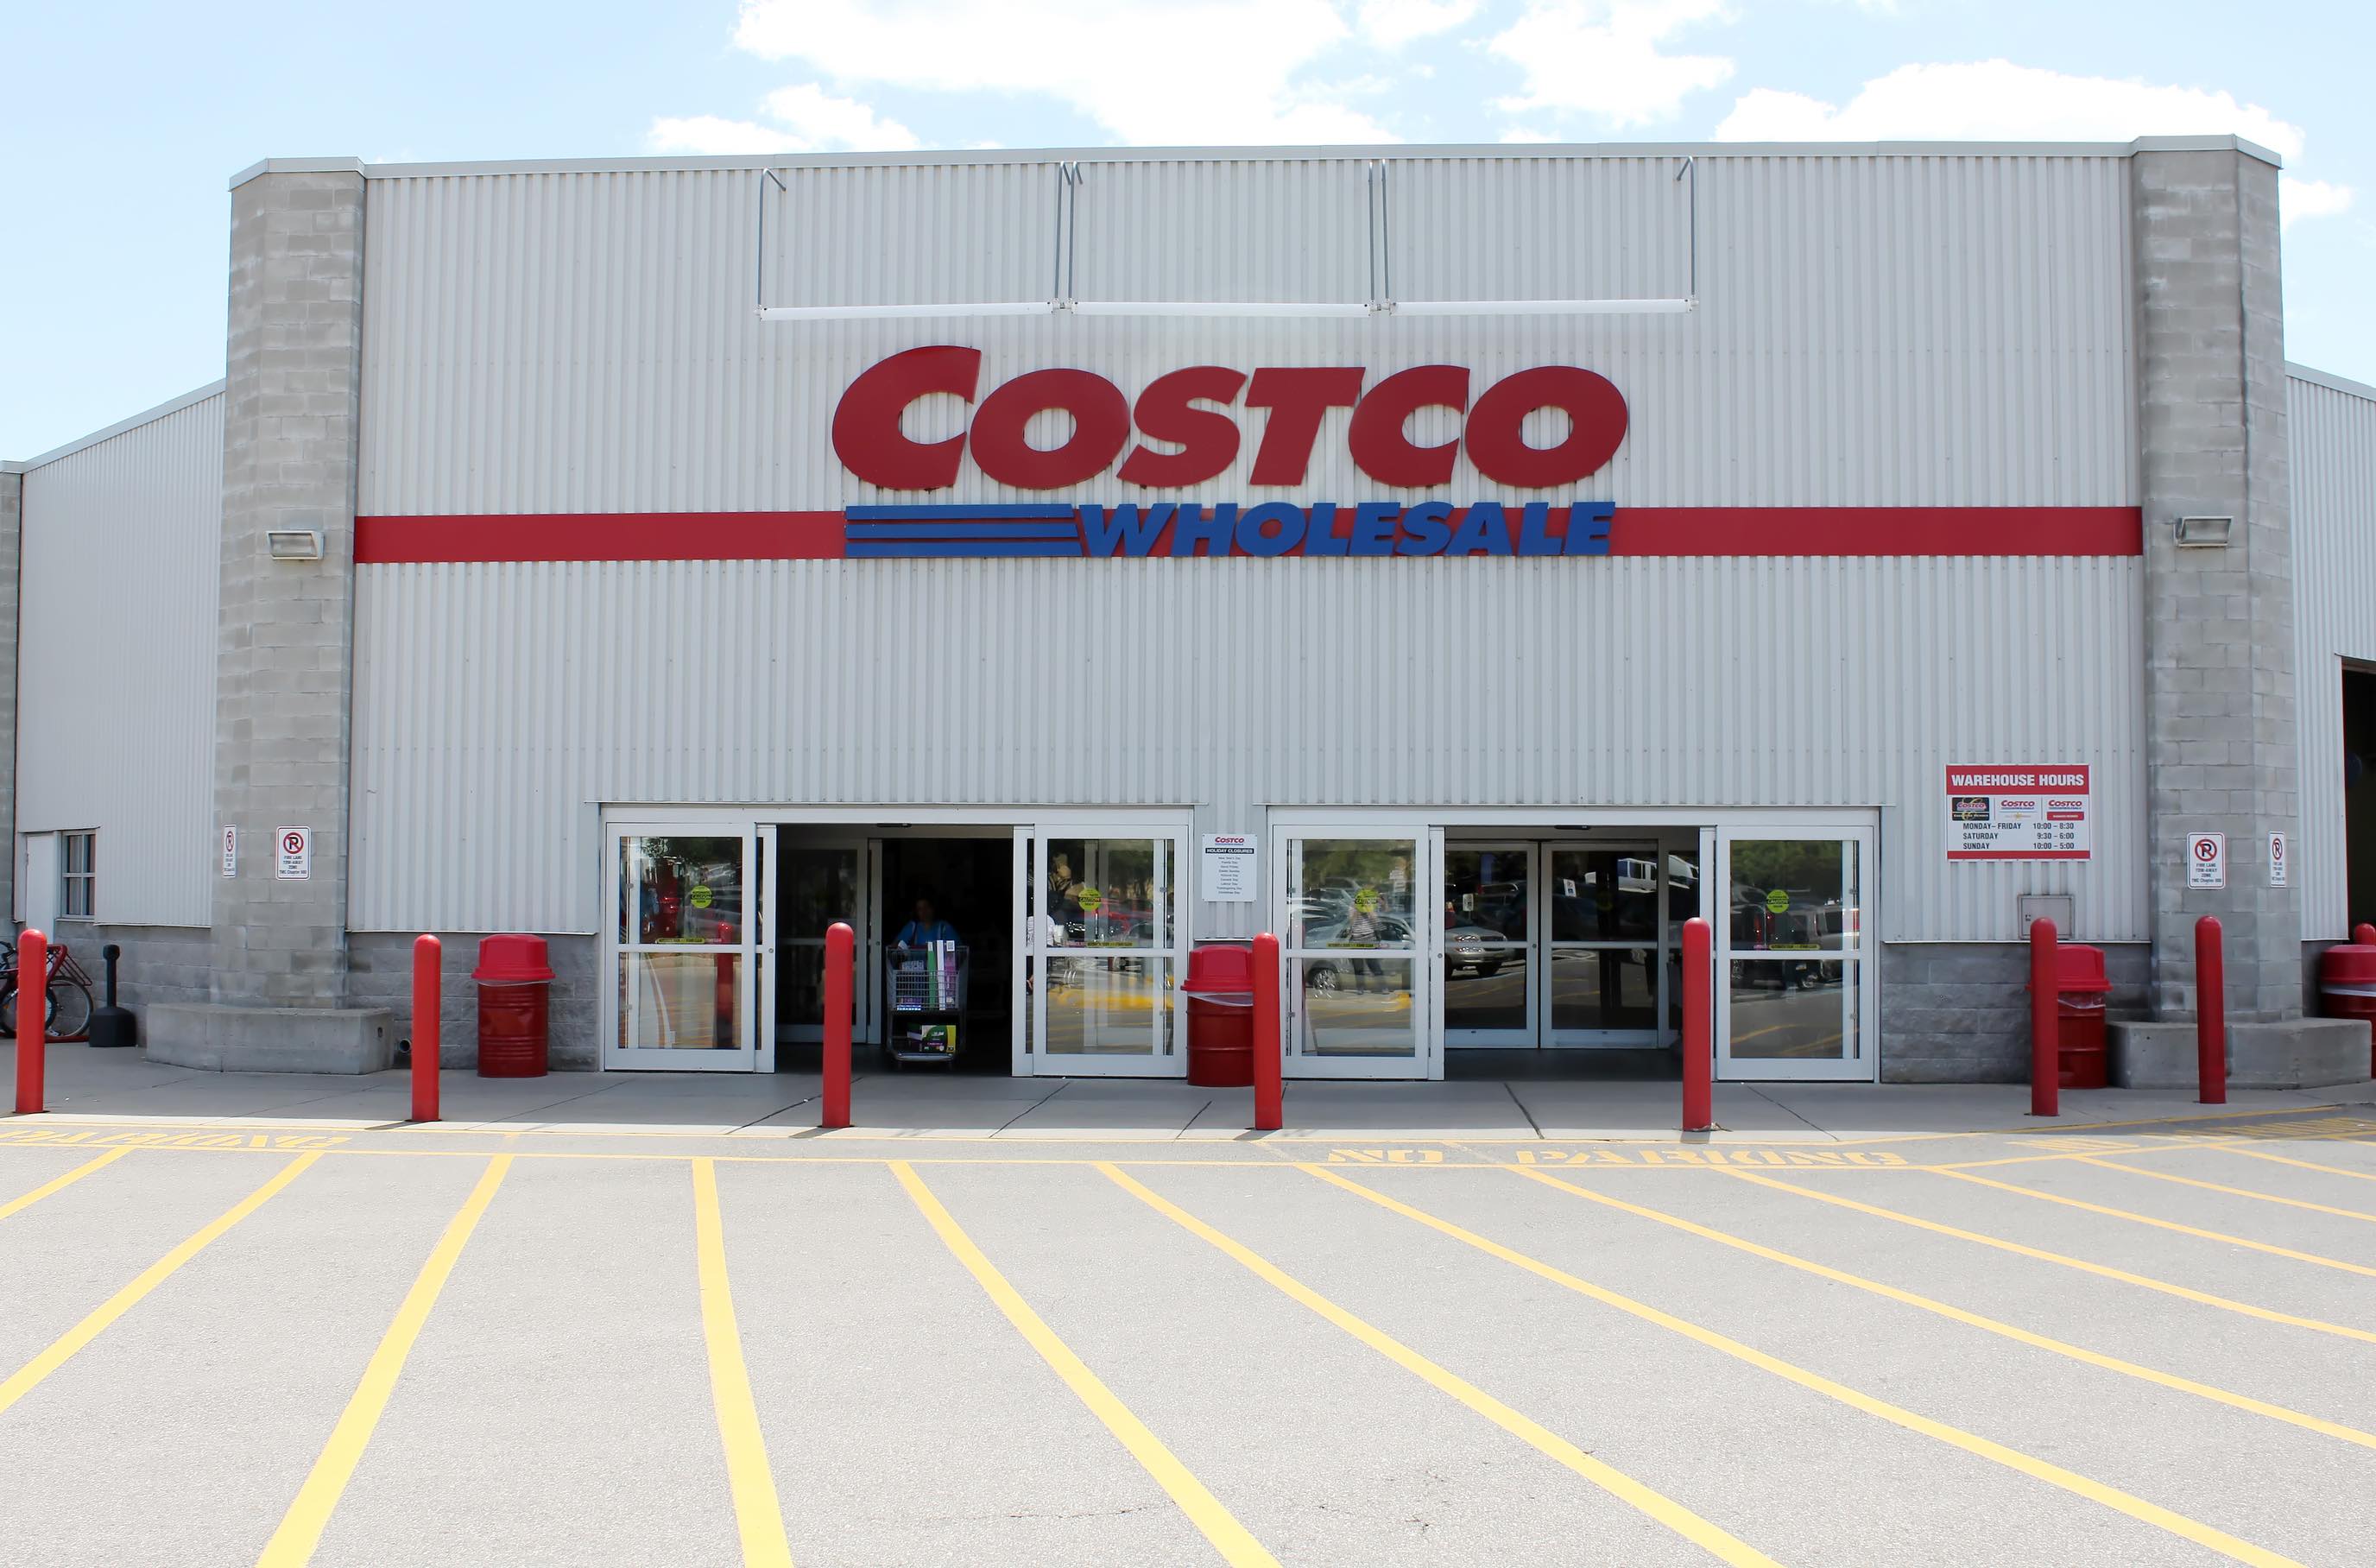 10 Kirkland Signature products you should always buy at Costco